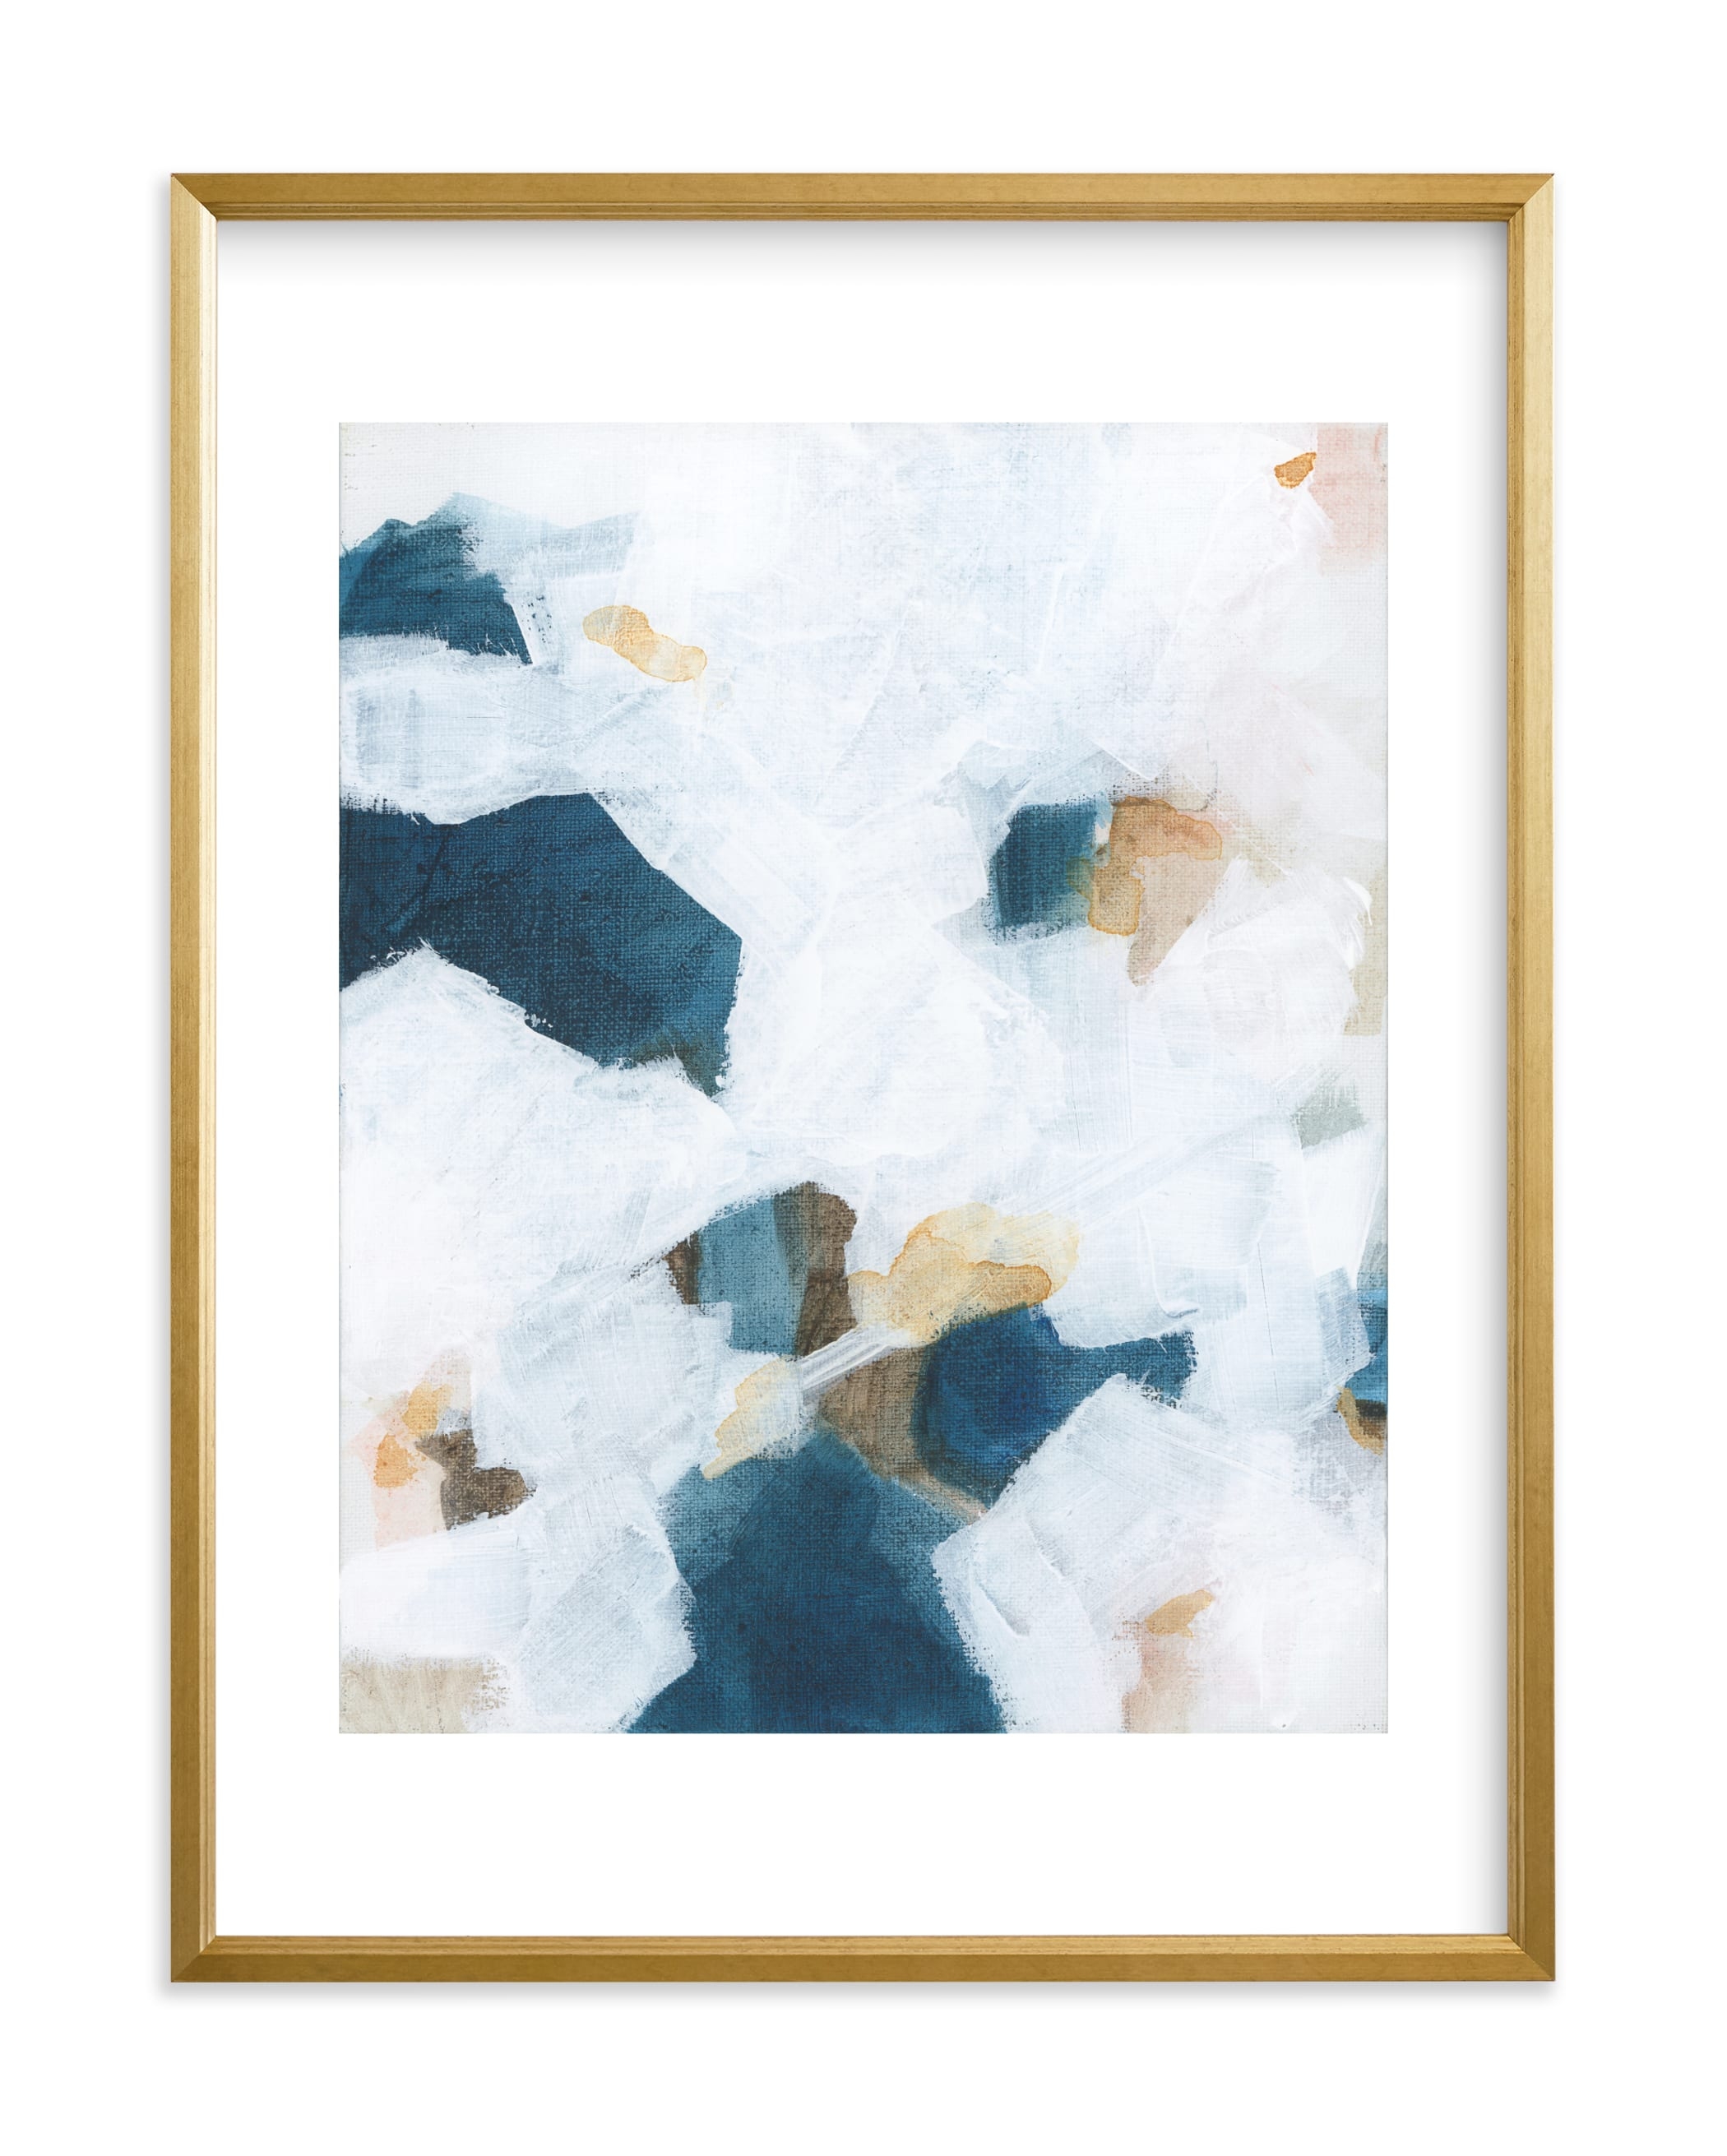 Betwixt & Between II  Limited Edition Art, 18" X 24", Gilded Wood Frame, Dark Blue, Standard Plexi & Materials, WHITE BORDER - Image 0